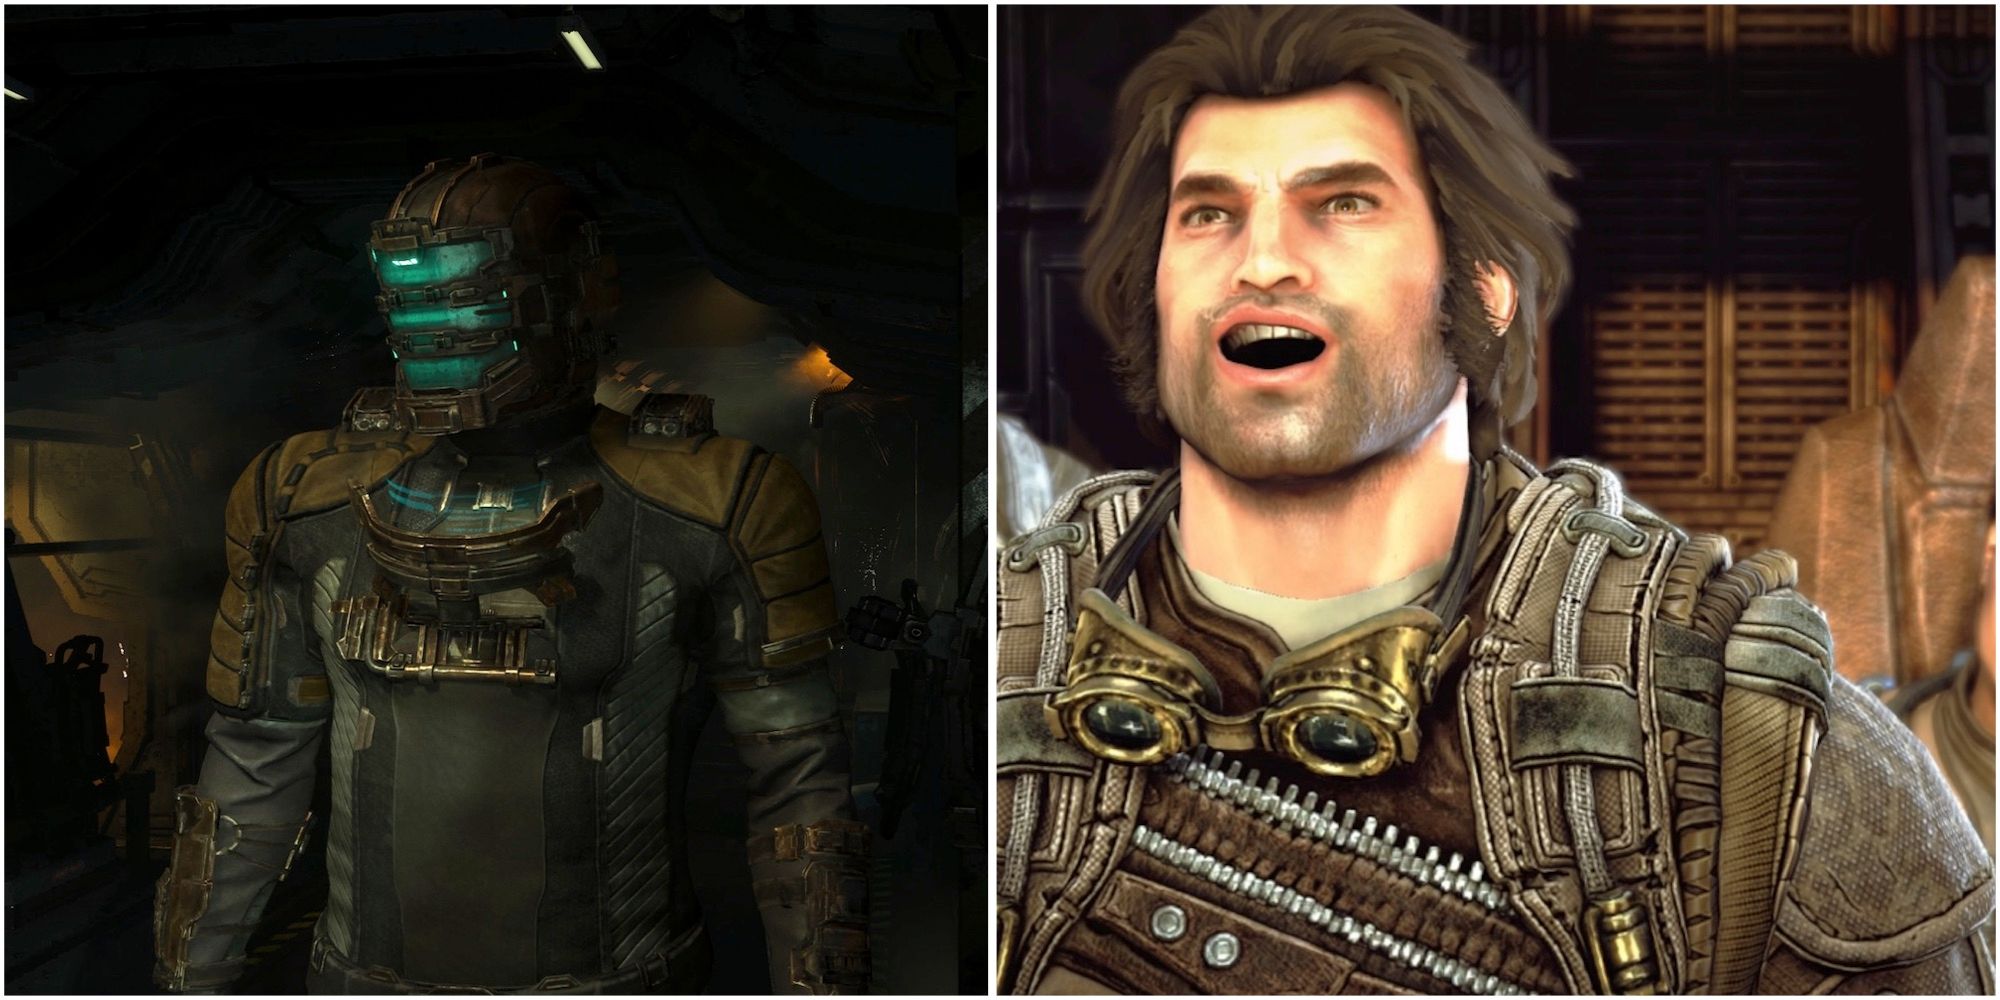 Isaac with his helmet on in the Dead Space remake and Grayson in Bulletstorm